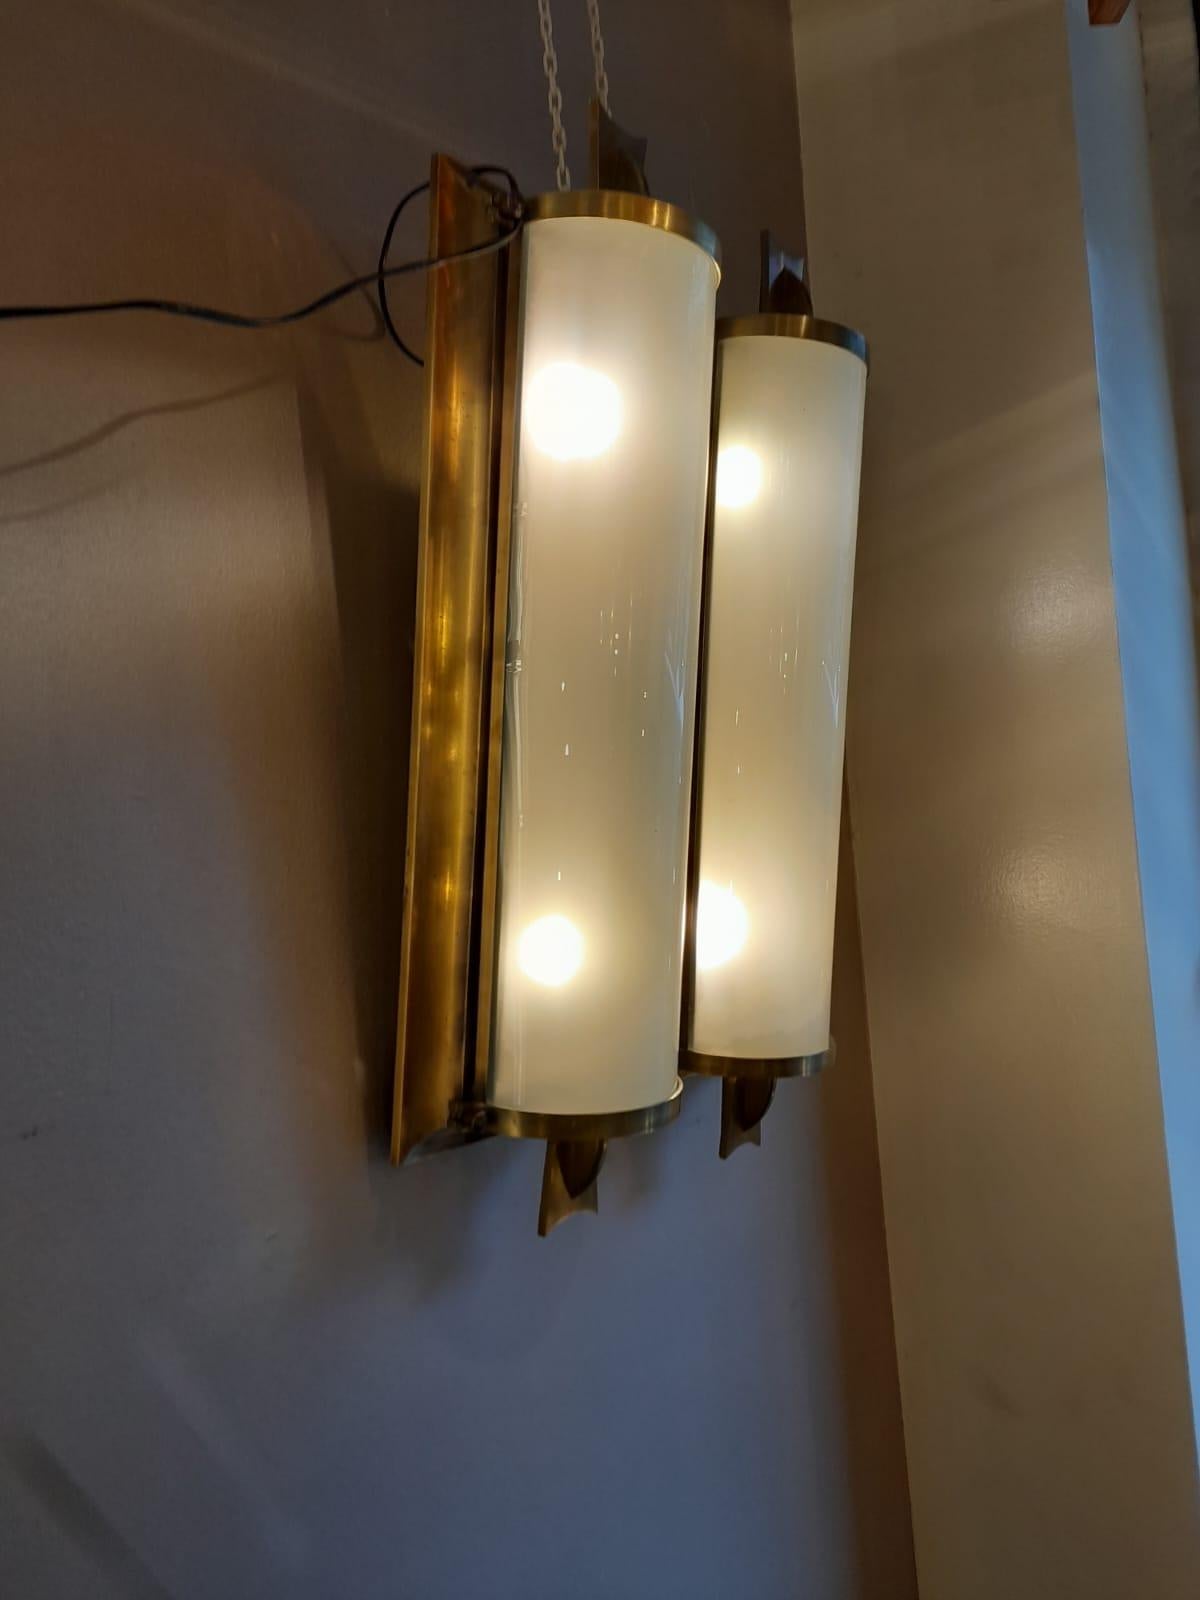 Art Deco Brass and Glass wall sconce. 4 lights 2 lampshades. From France from 1930s period.

size: L 50 cm, h 85 cm, D 13 cm.